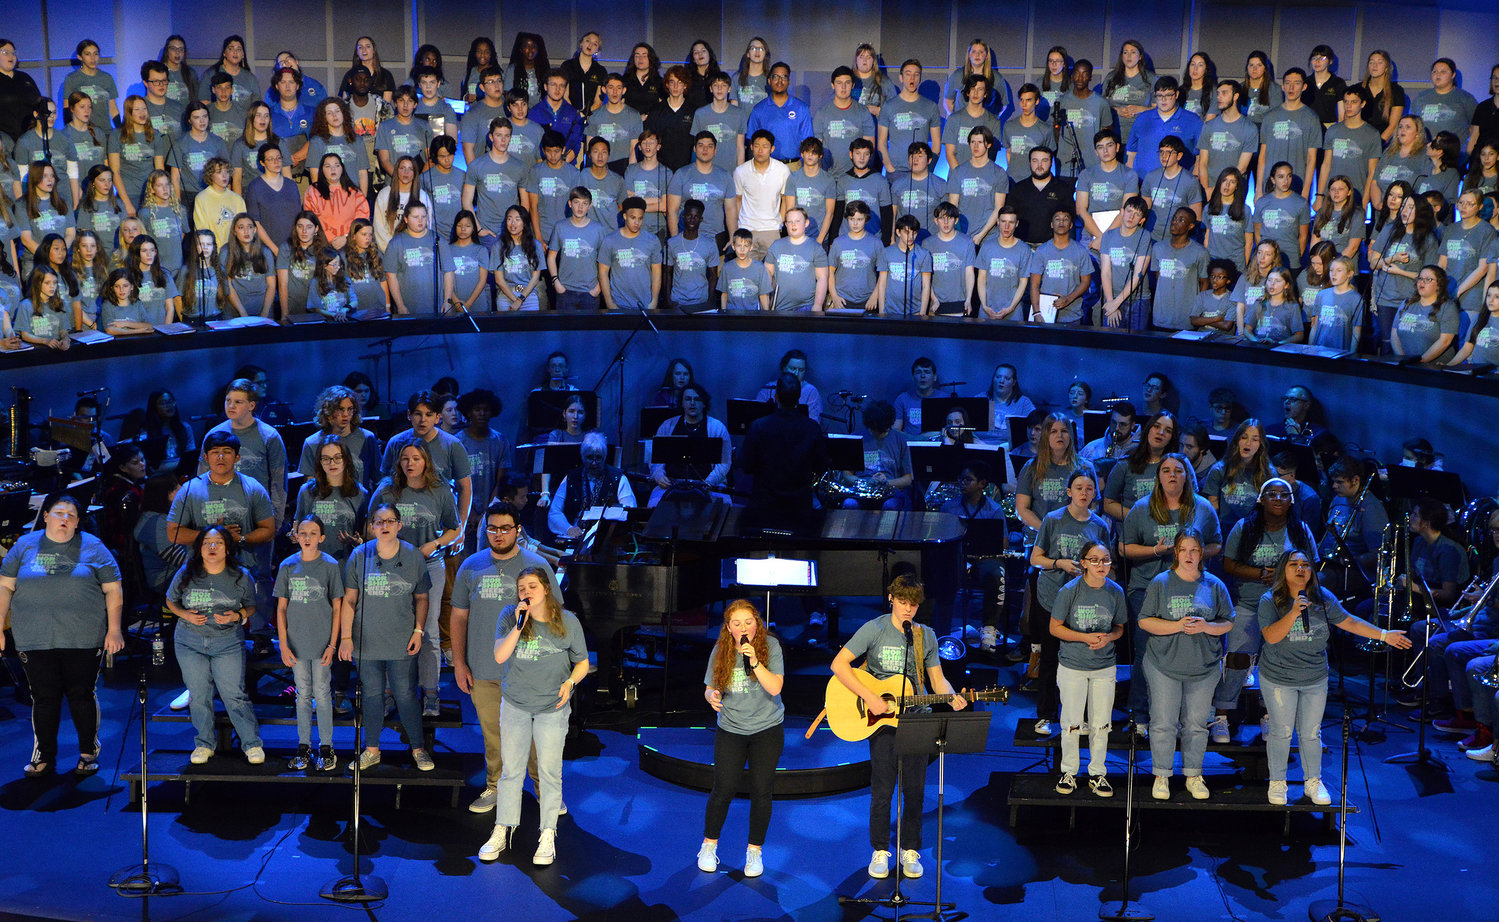 Students in the praise team and choir during a worship concert at the conclusion of REEL Fest 2023 held at First Baptist Church of Jonesboro, Ga., Saturday, Jan. 21, 2023. (Index/Henry Durand)